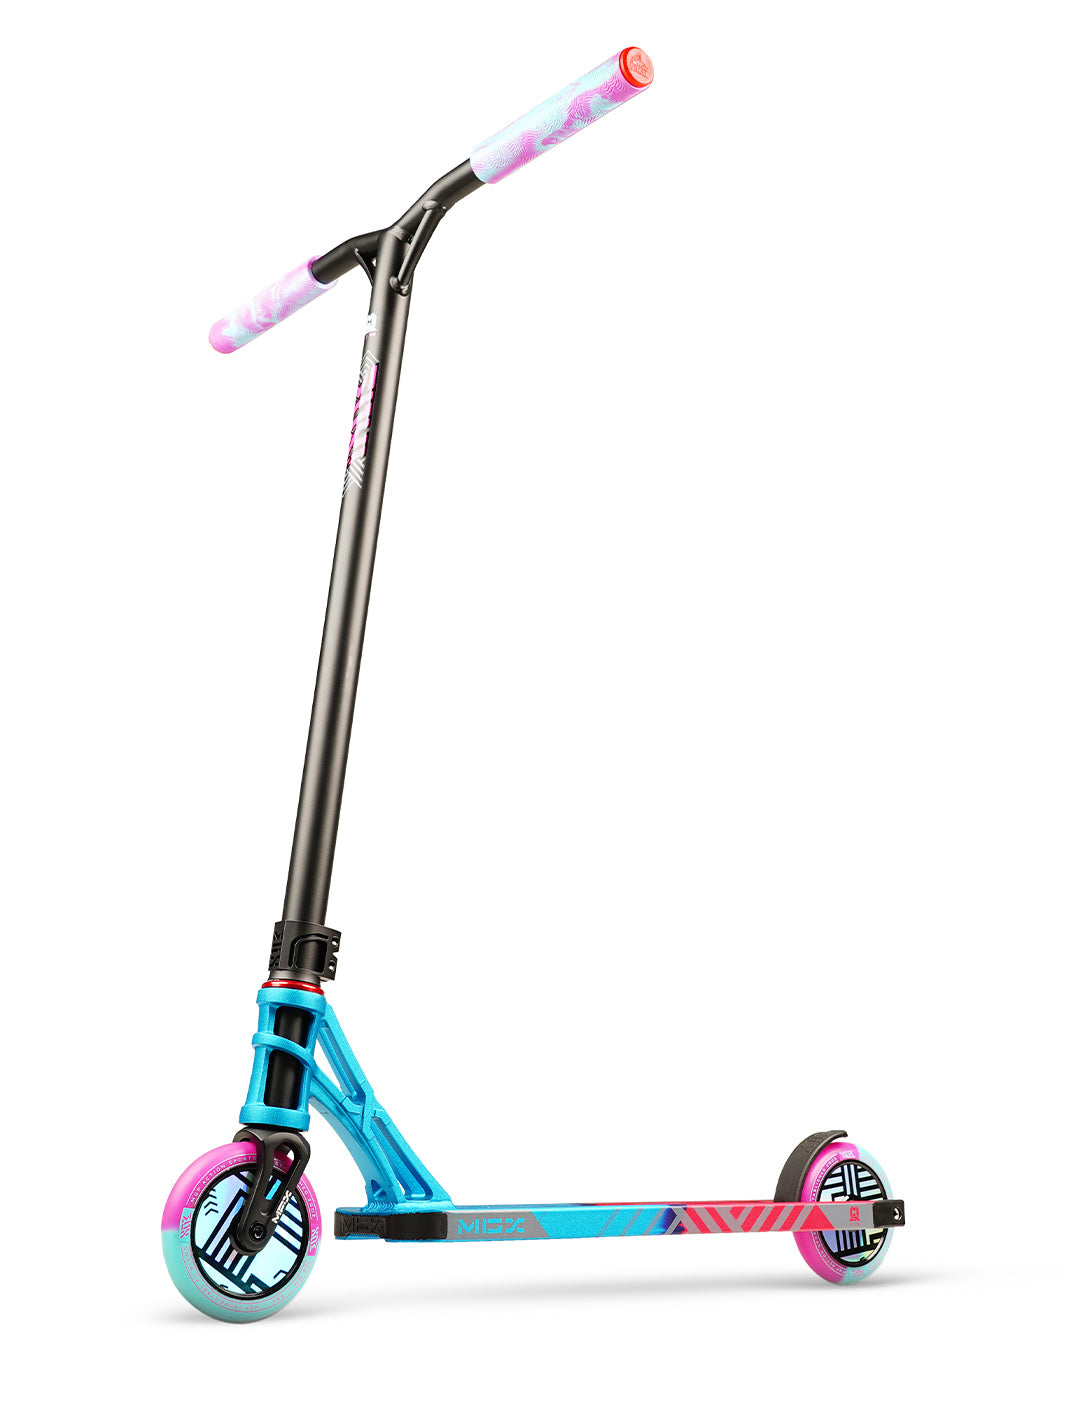 MGX T2 Team Complete Pro Stunt Scooter madd Gear Blue Pink Lightest